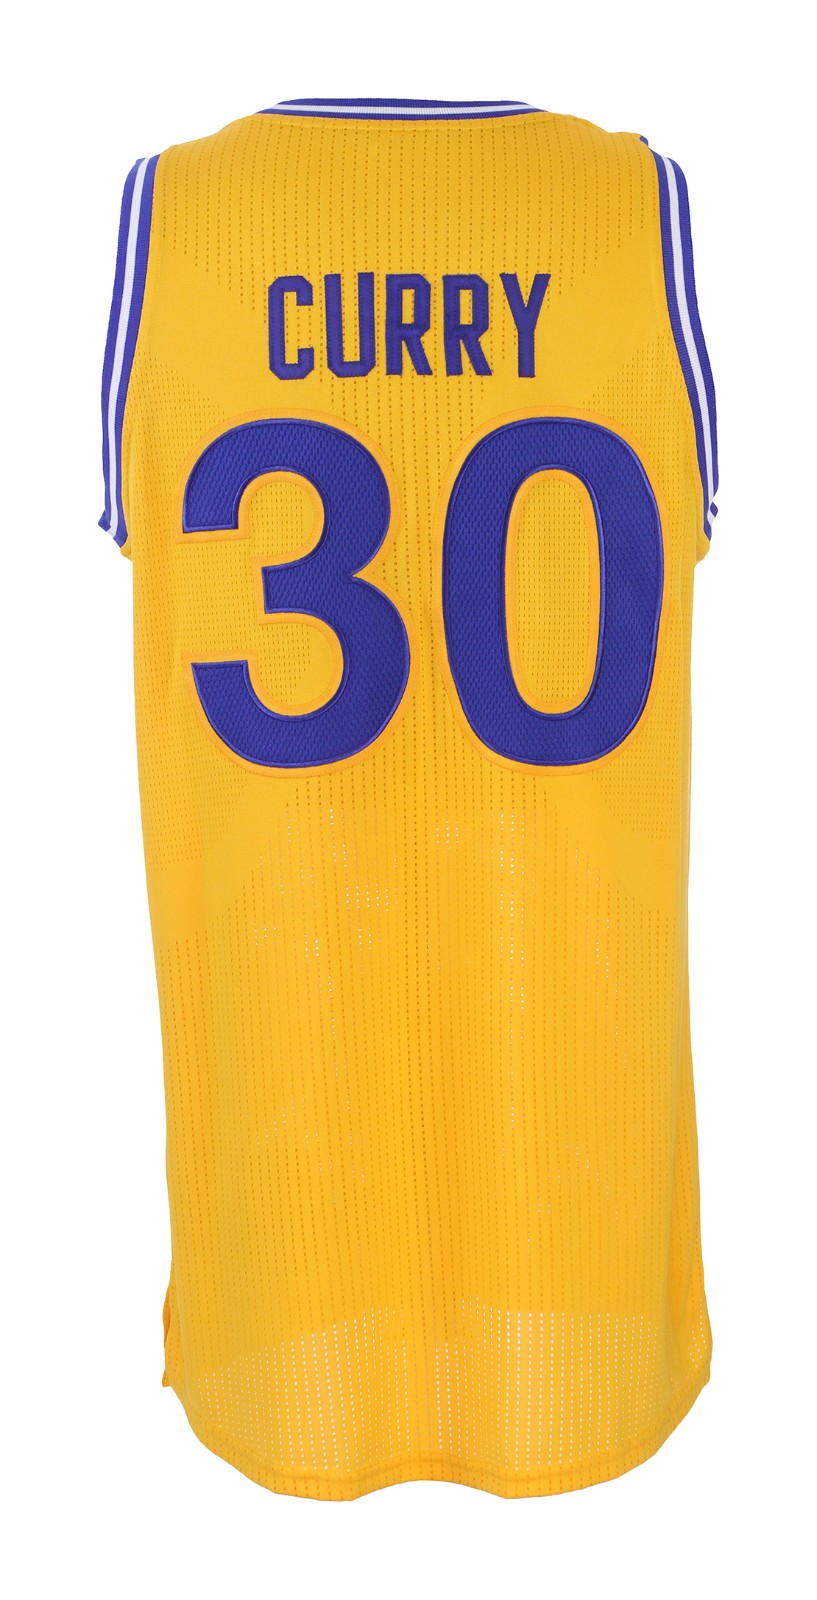 Athletic Knit B1710-451 Blank 2010-11 Golden State Warriors Basketball Jersey